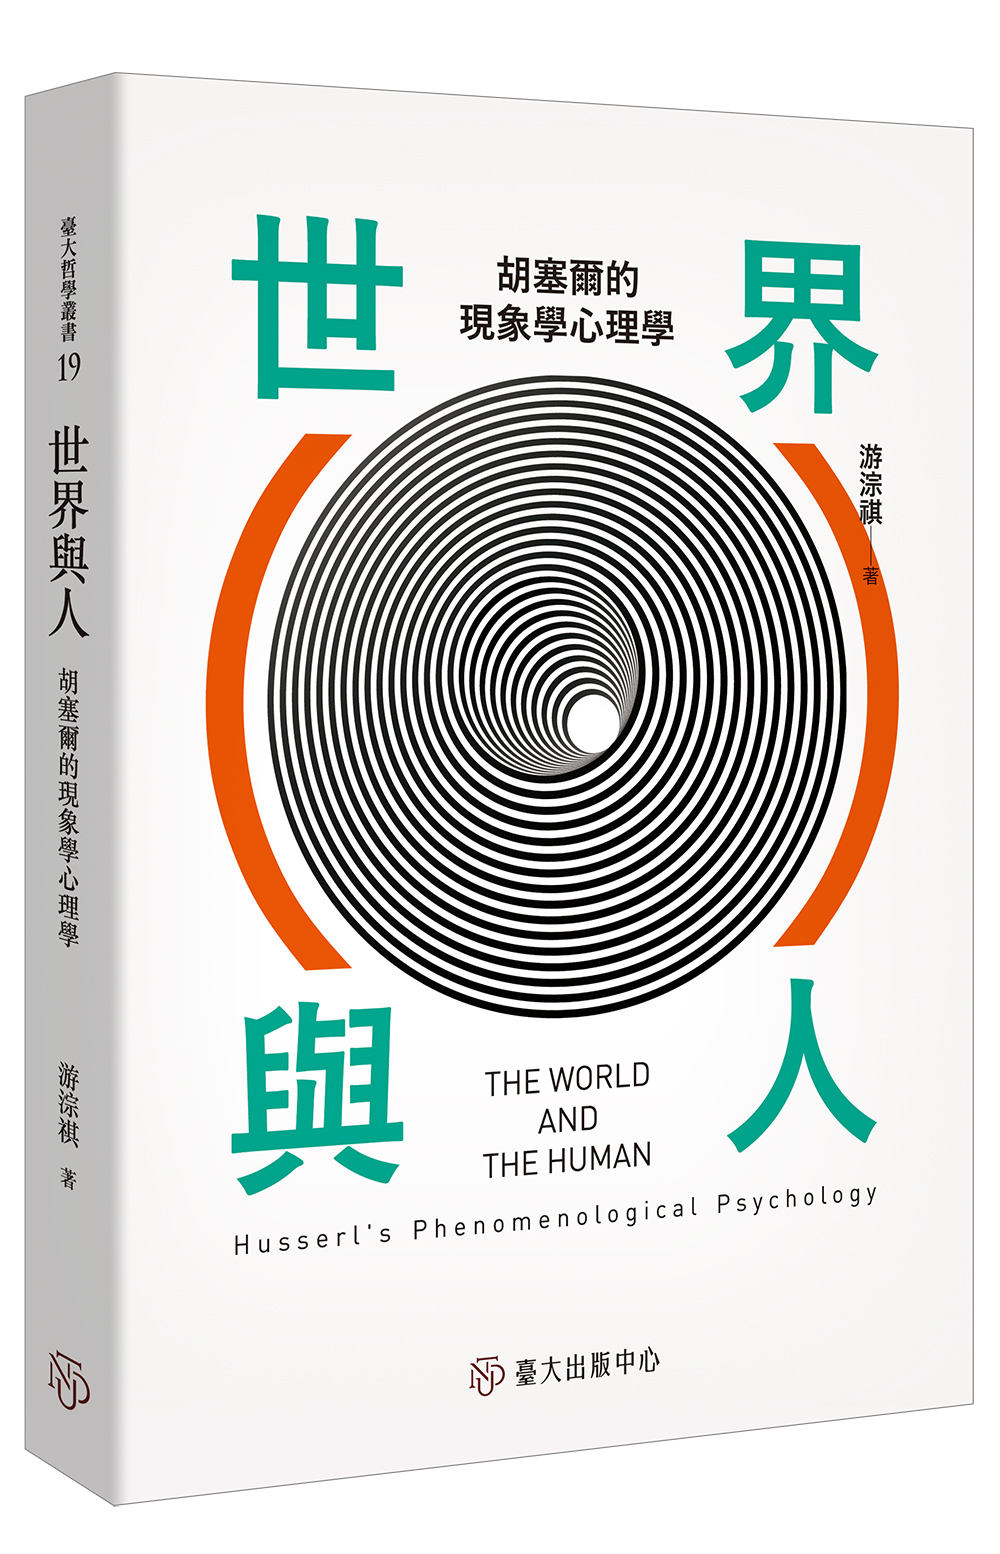 The World and the Human: Husserl's Phenomenological Psychology